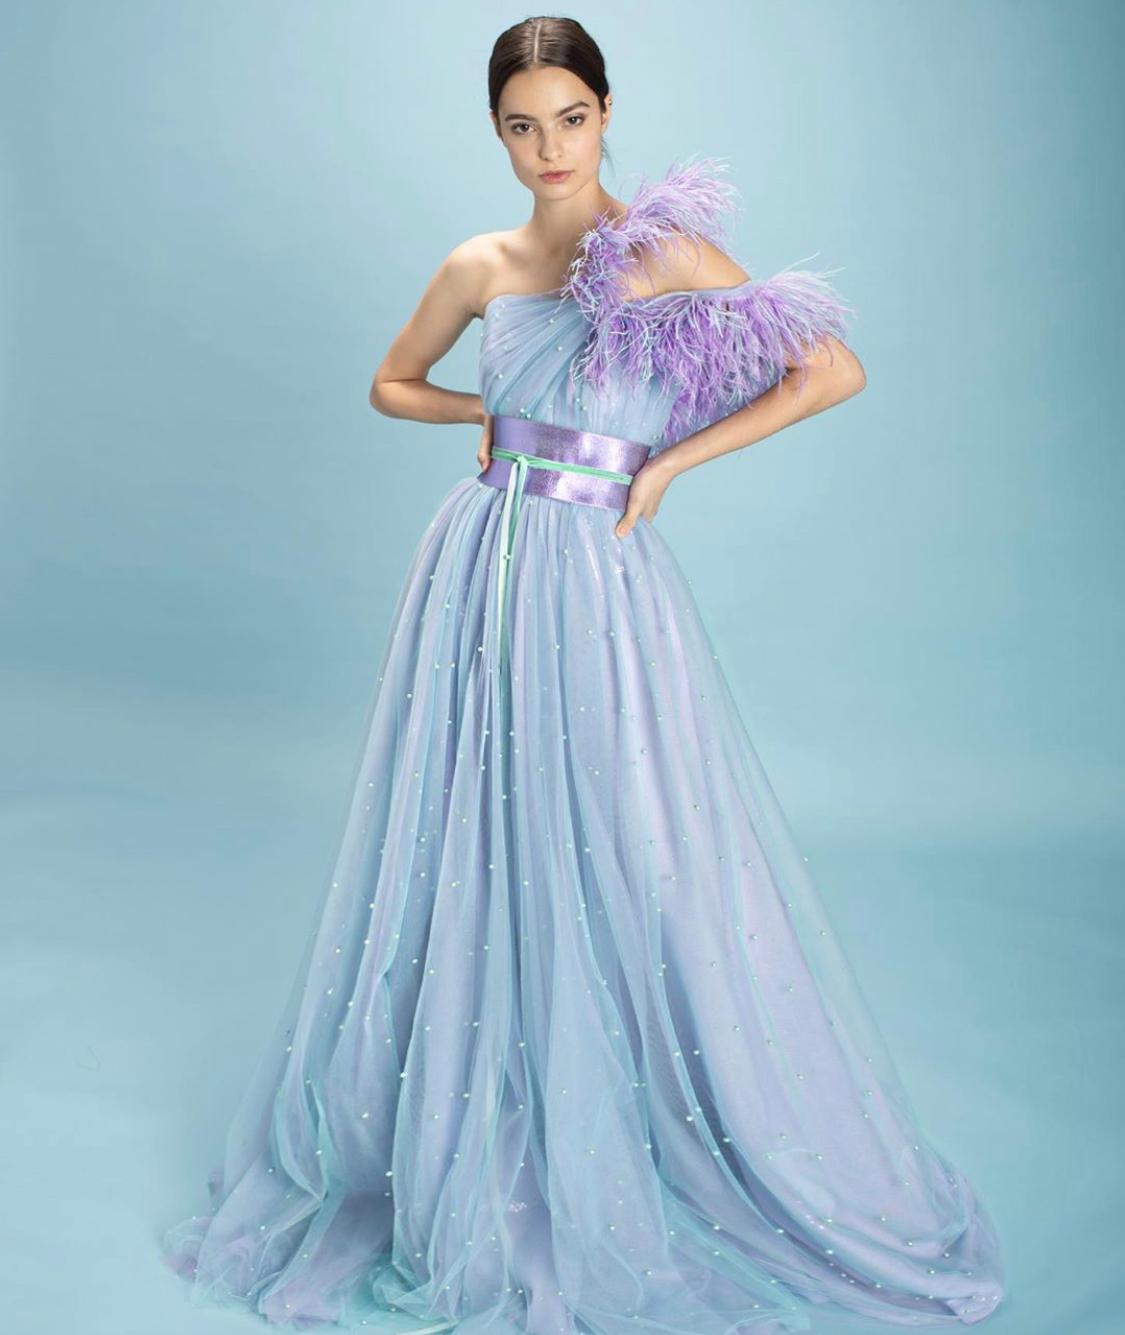 Purple A-Line dress with feathers and one shoulder sleeve